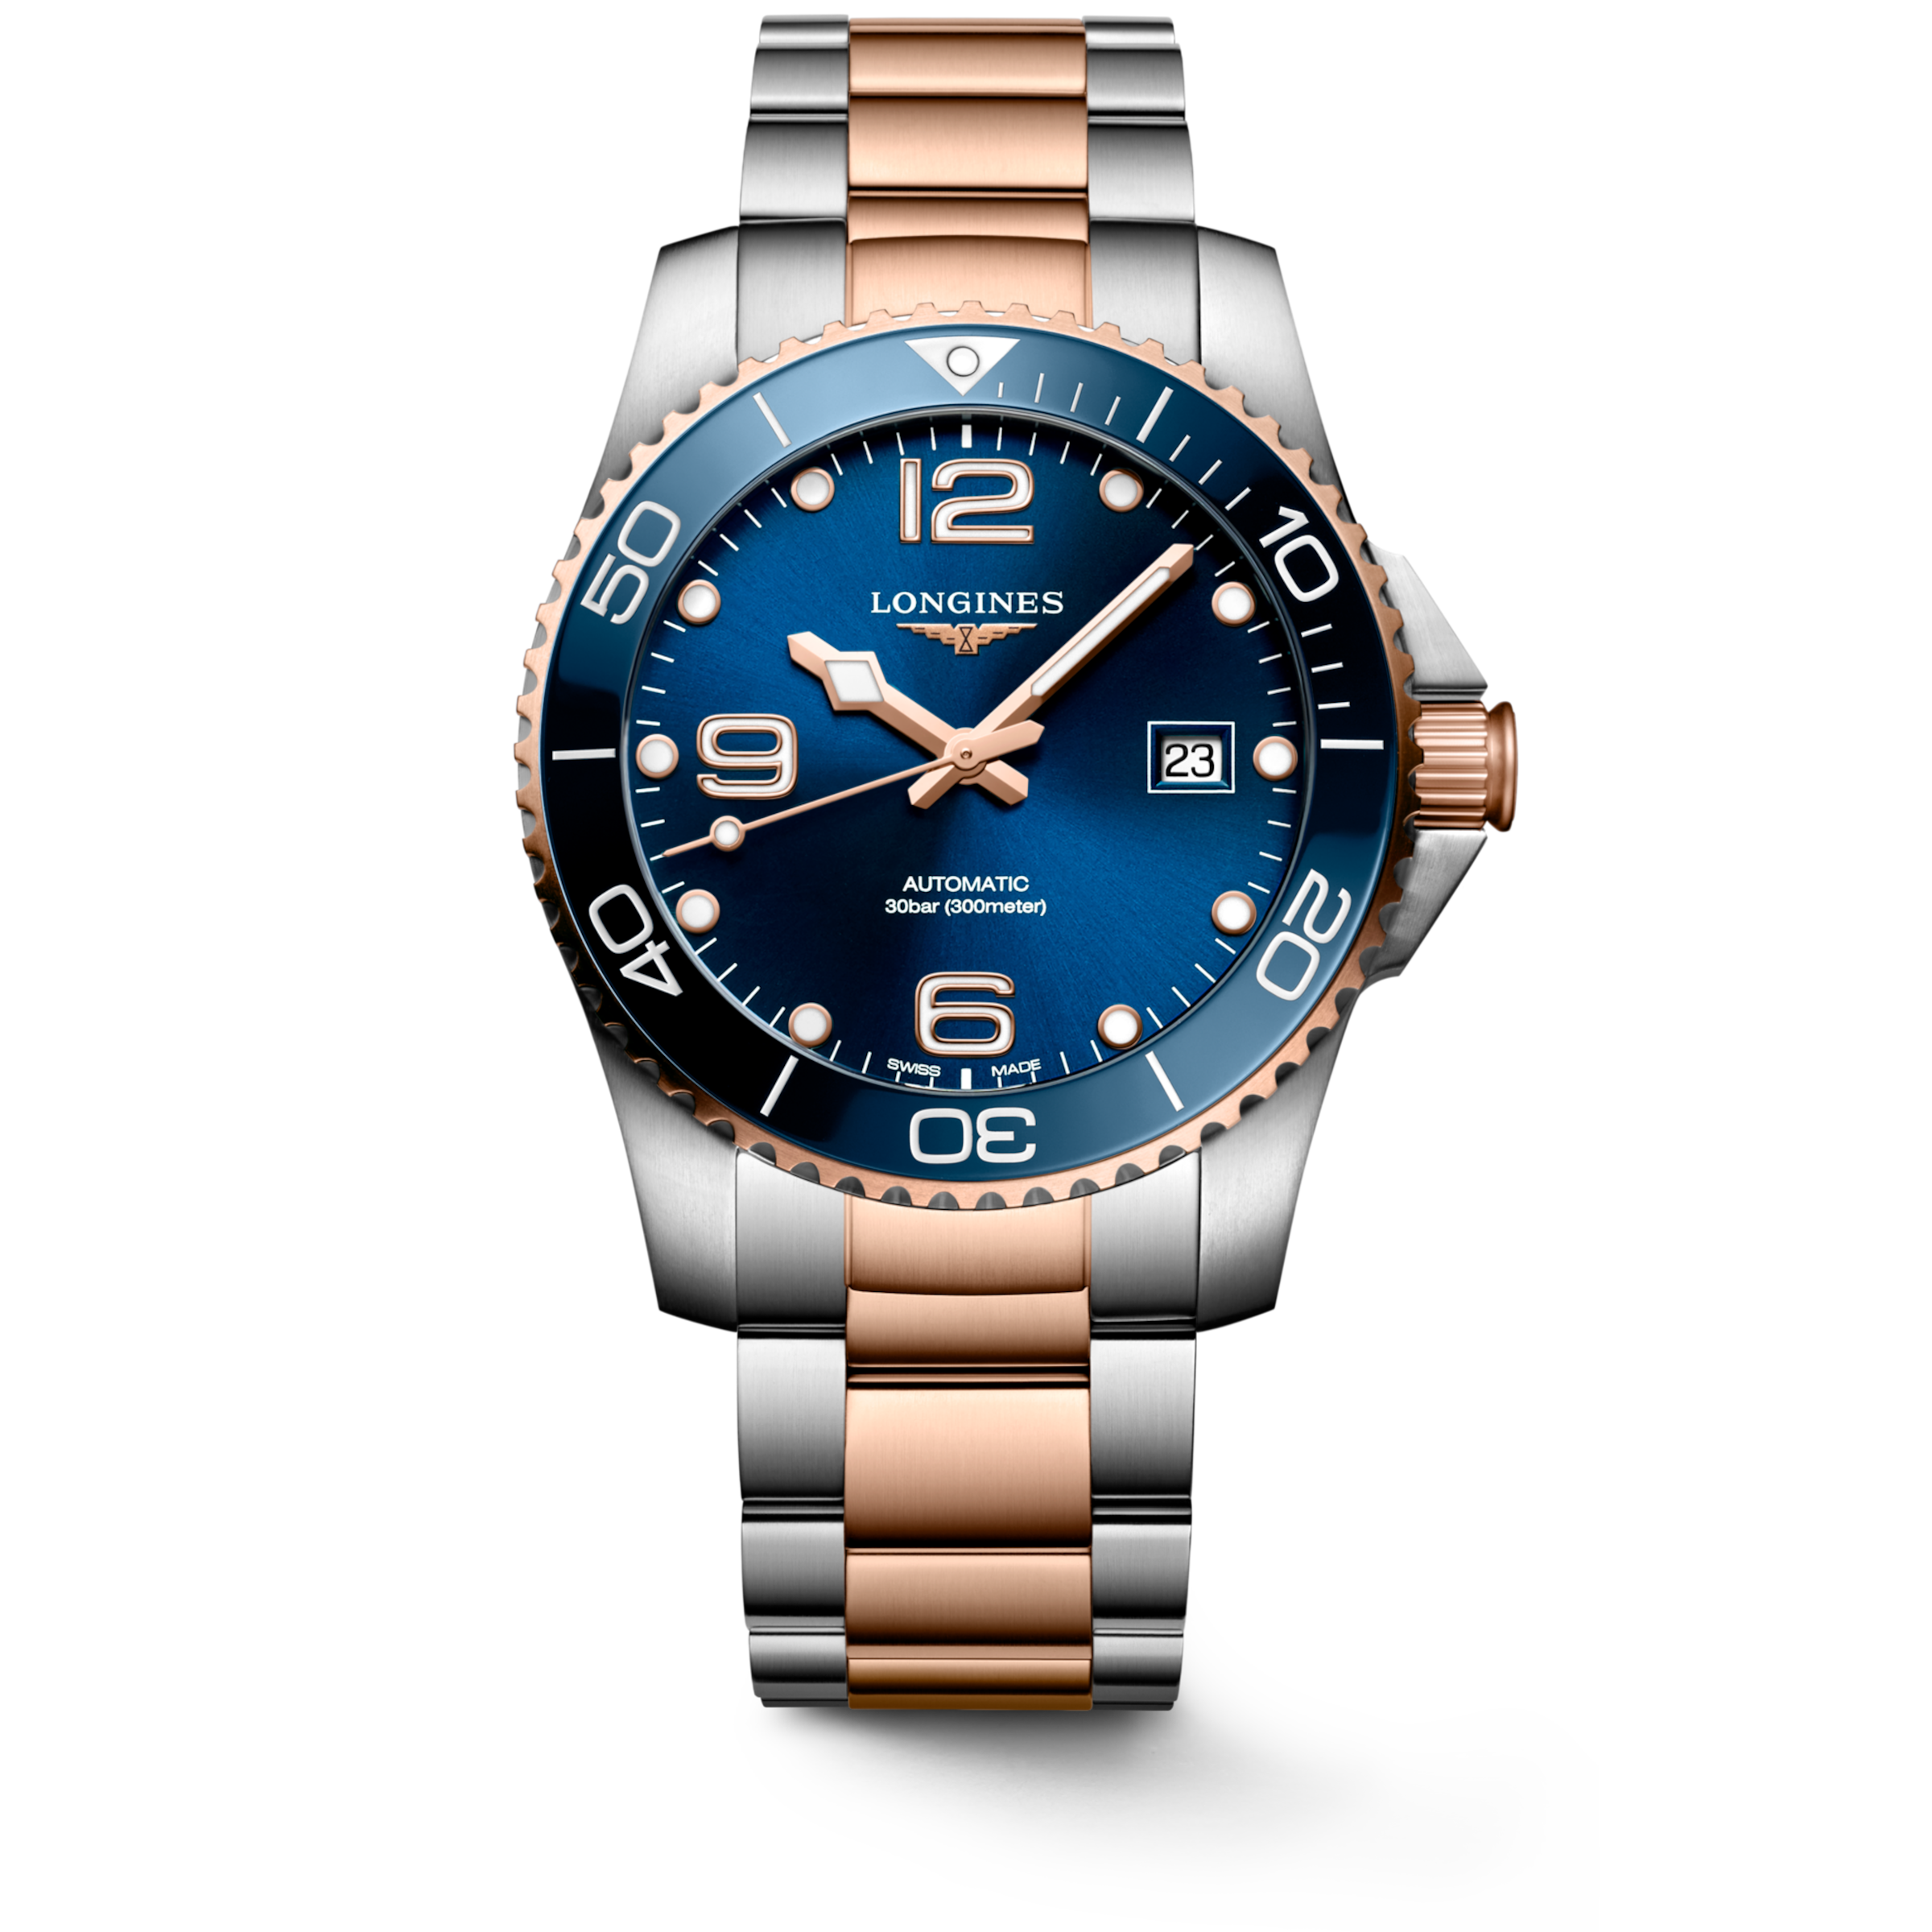 Longines HYDROCONQUEST Automatic Stainless steel and ceramic bezel Watch - L3.781.3.98.7